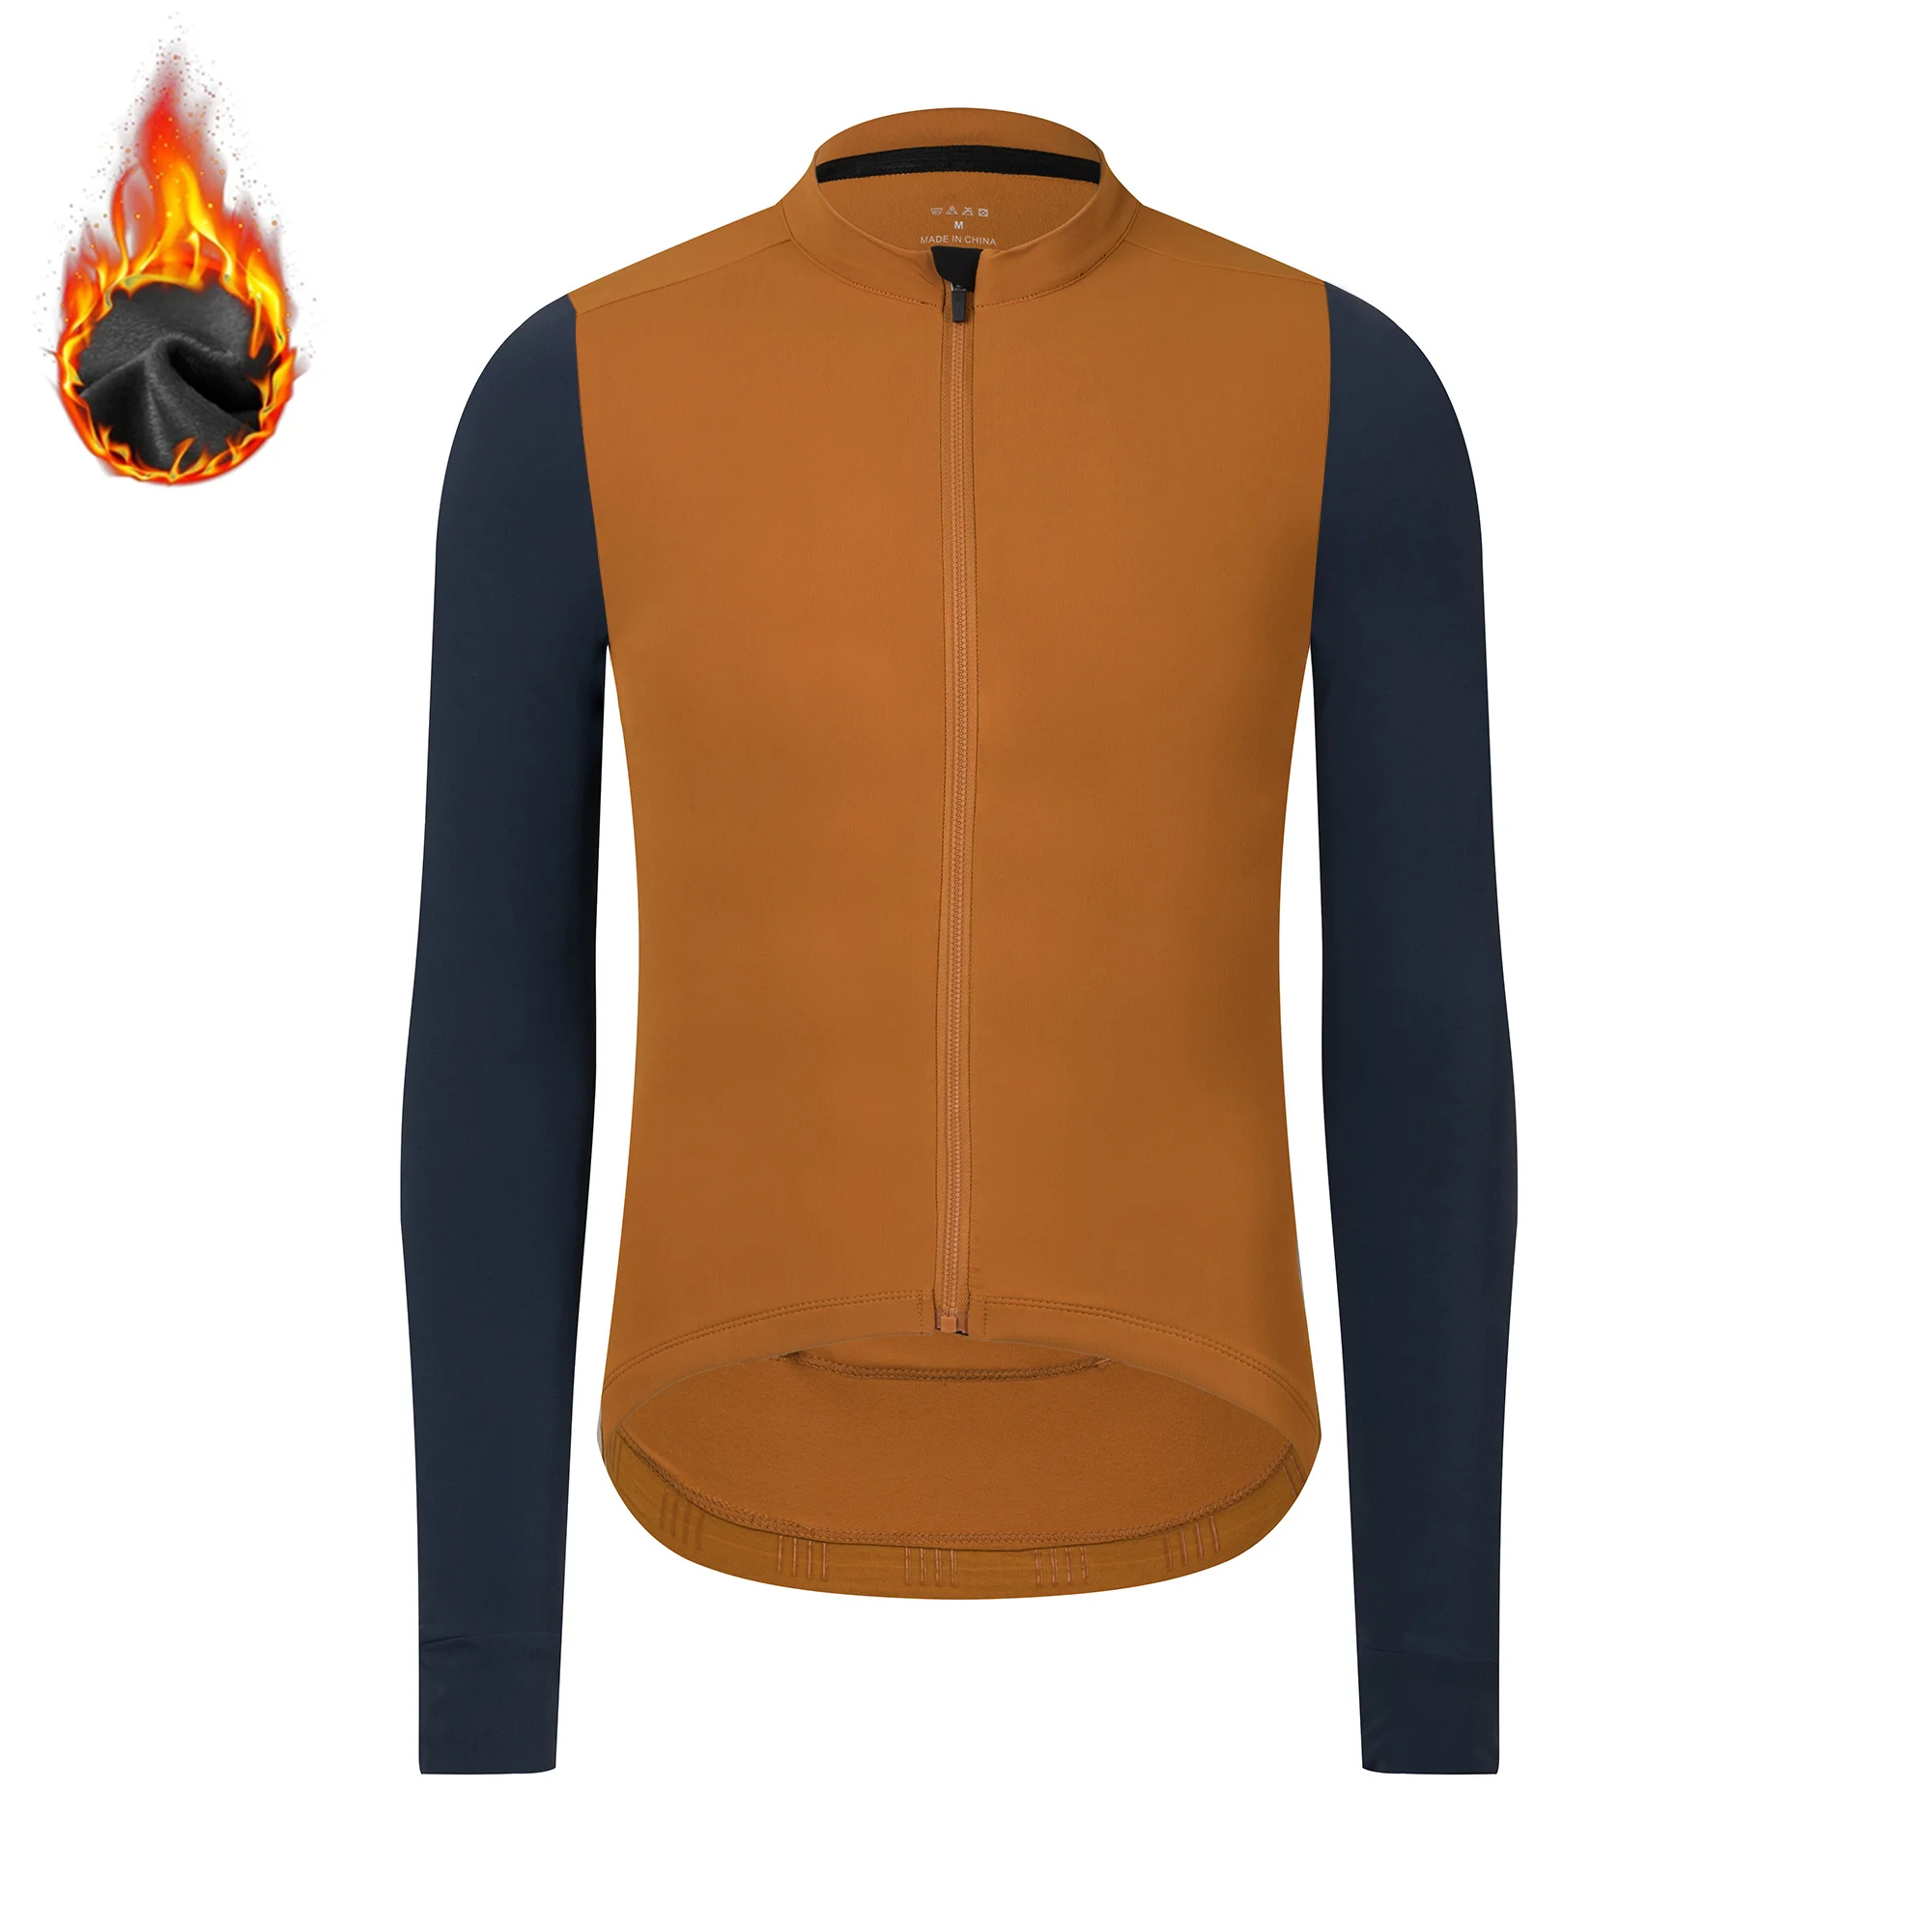 Spexcell Rsantce 2022 Winter Thermal Fleece Cycling Jersey Top MTB Bike Outdoor Men's Bicycle Clothing Long Sleeve Shirt Uniform